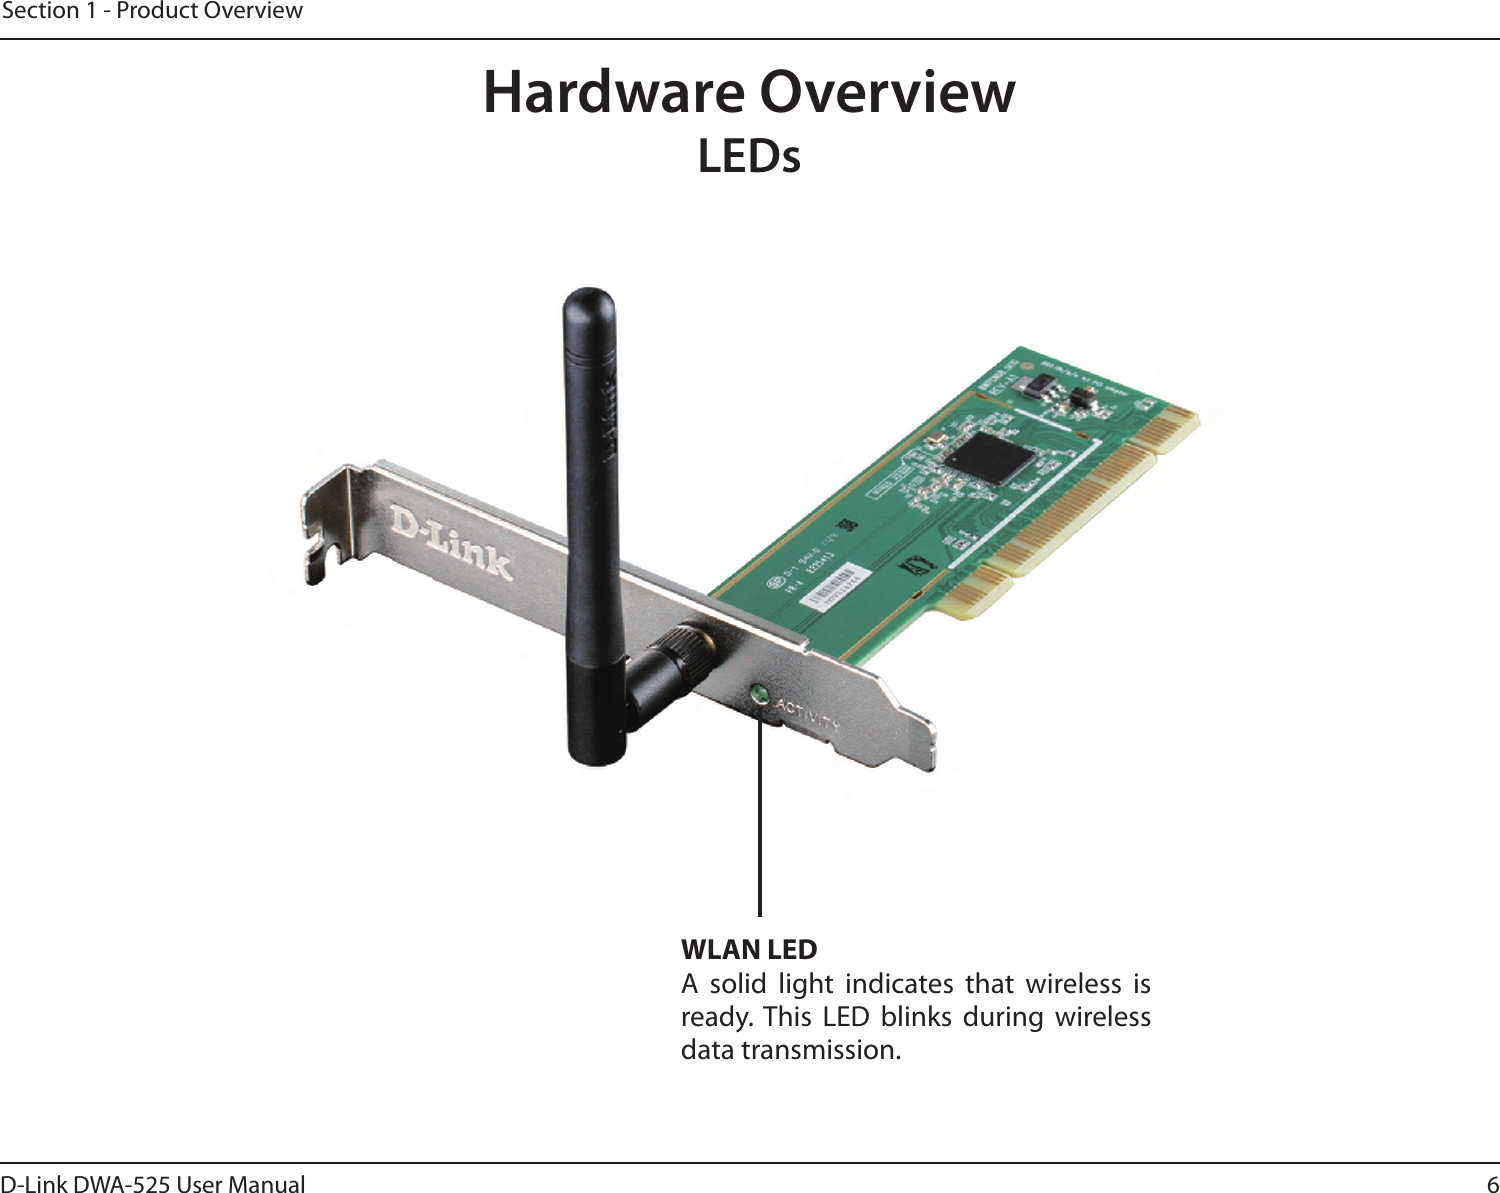 6D-Link DWA-525 User ManualSection 1 - Product OverviewHardware OverviewLEDsWLAN LEDA  solid  light  indicates  that  wireless  is ready. This  LED  blinks  during  wireless data transmission.